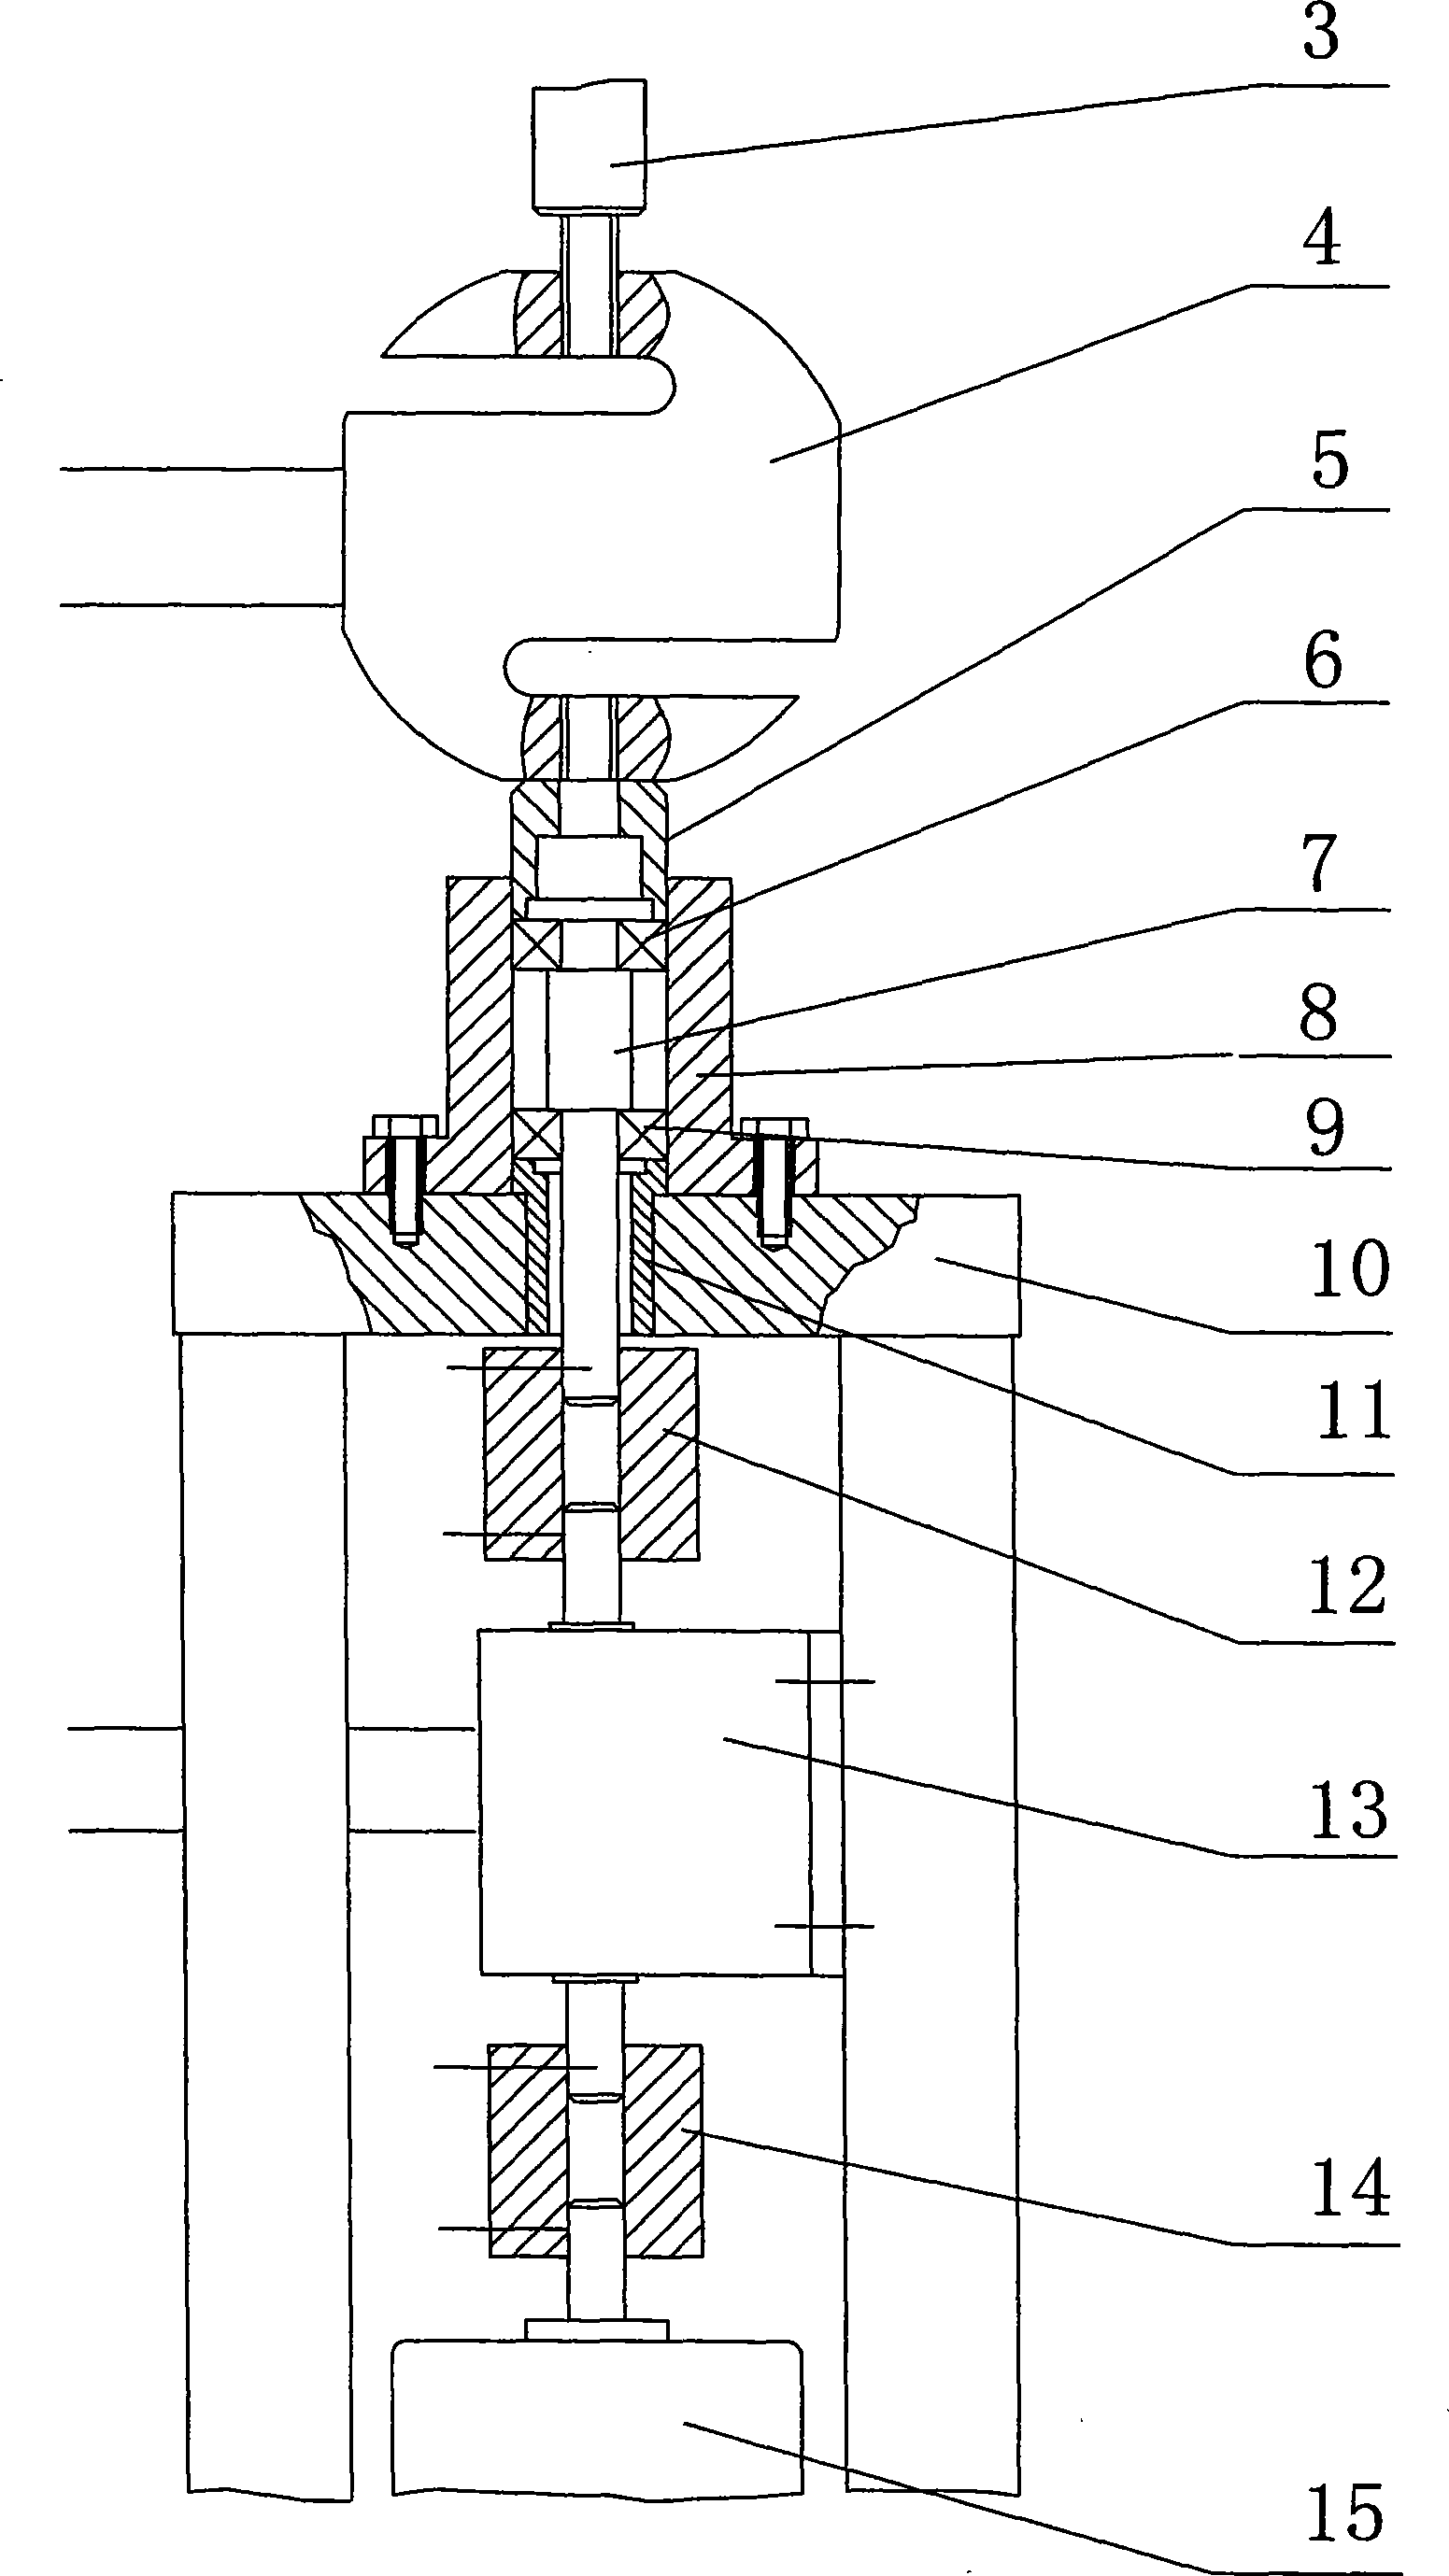 Measuring apparatus for frictional moment of bearing under different axial loads and rotation speeds